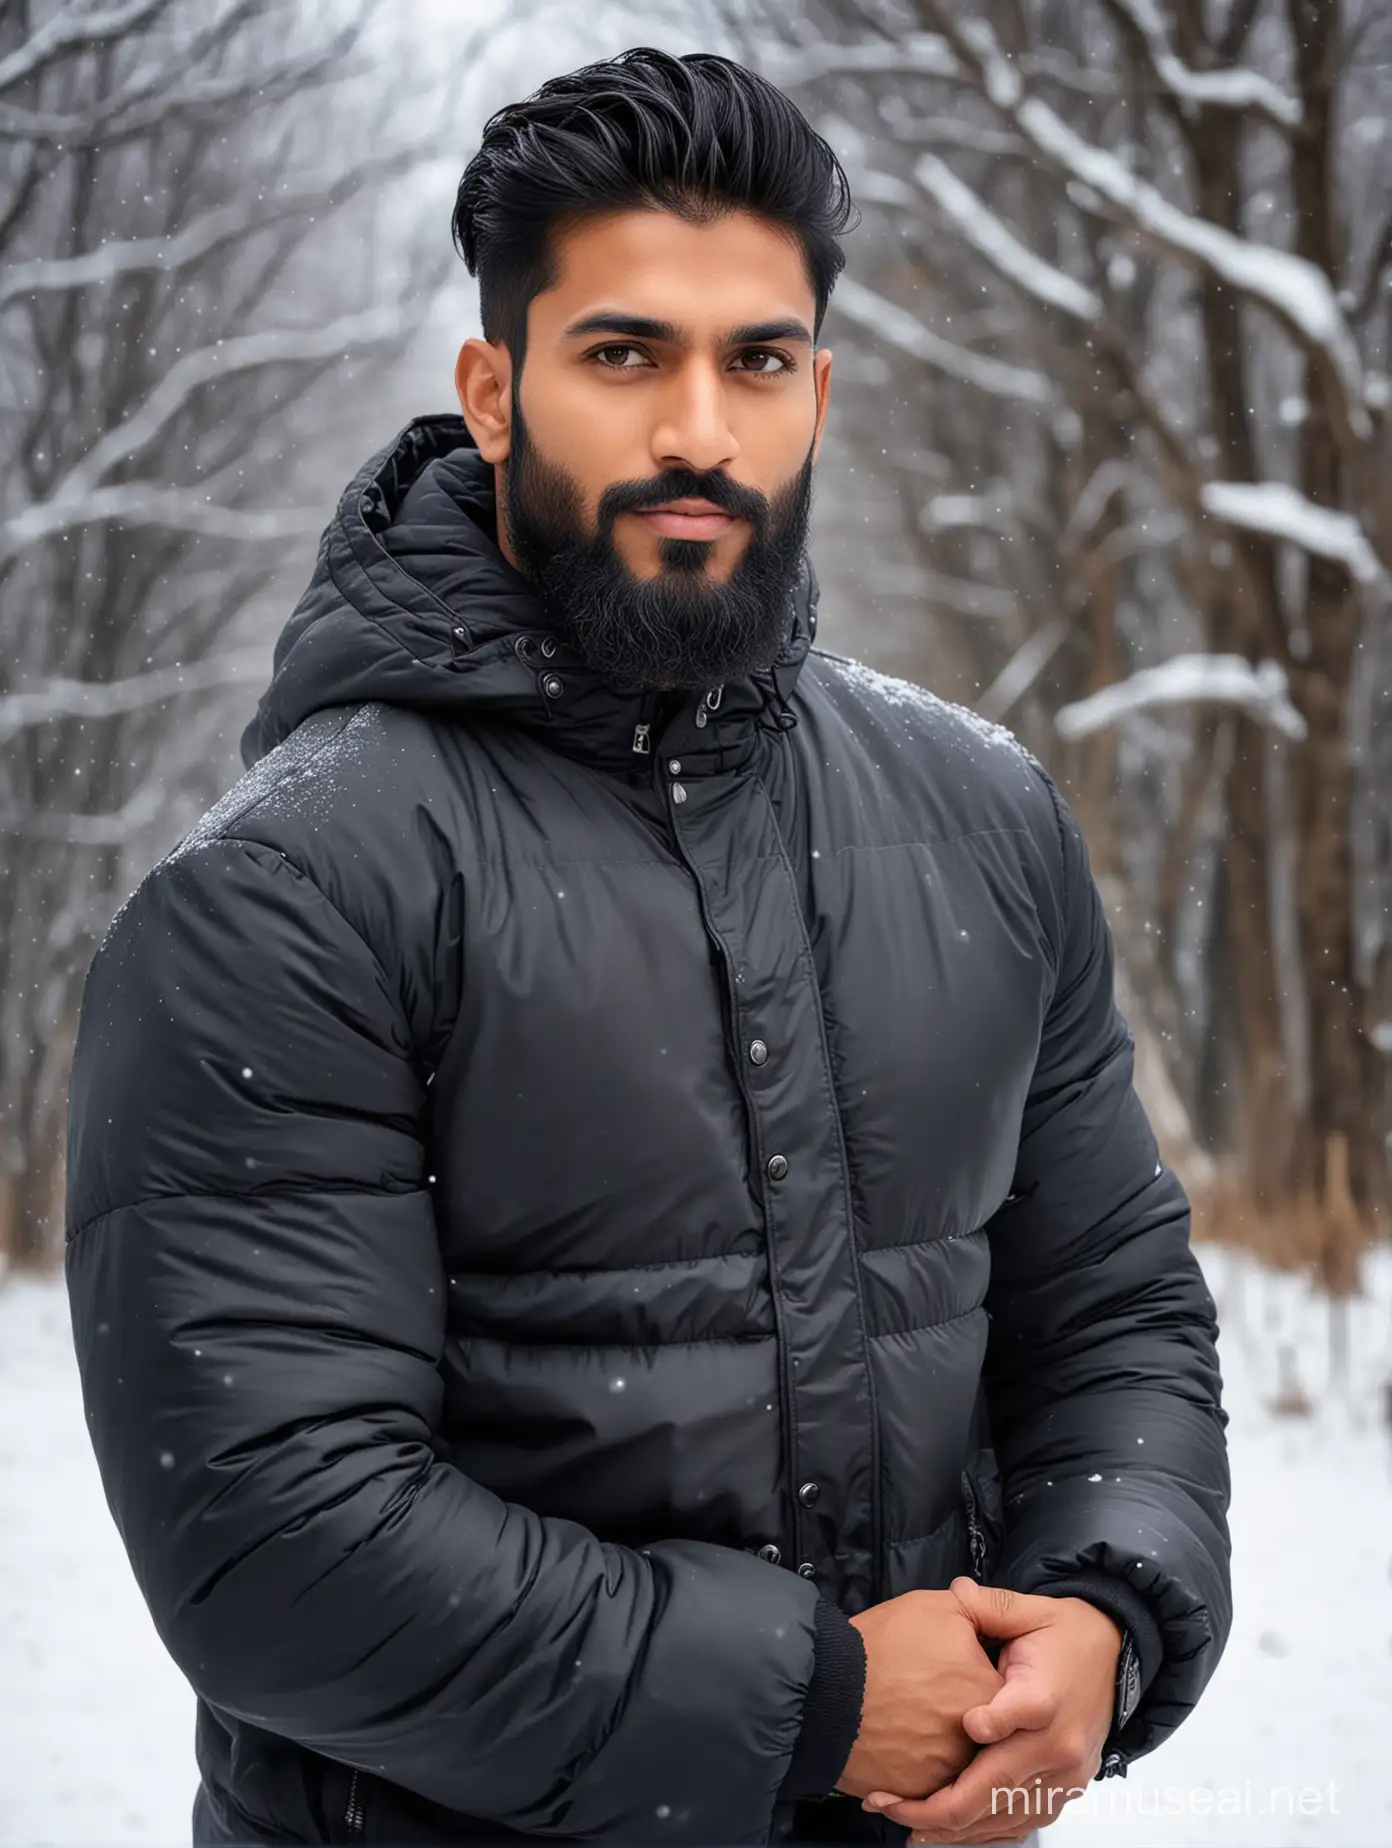 Stylish Muscular Indian Men in Snowy Setting with Puff Jacket